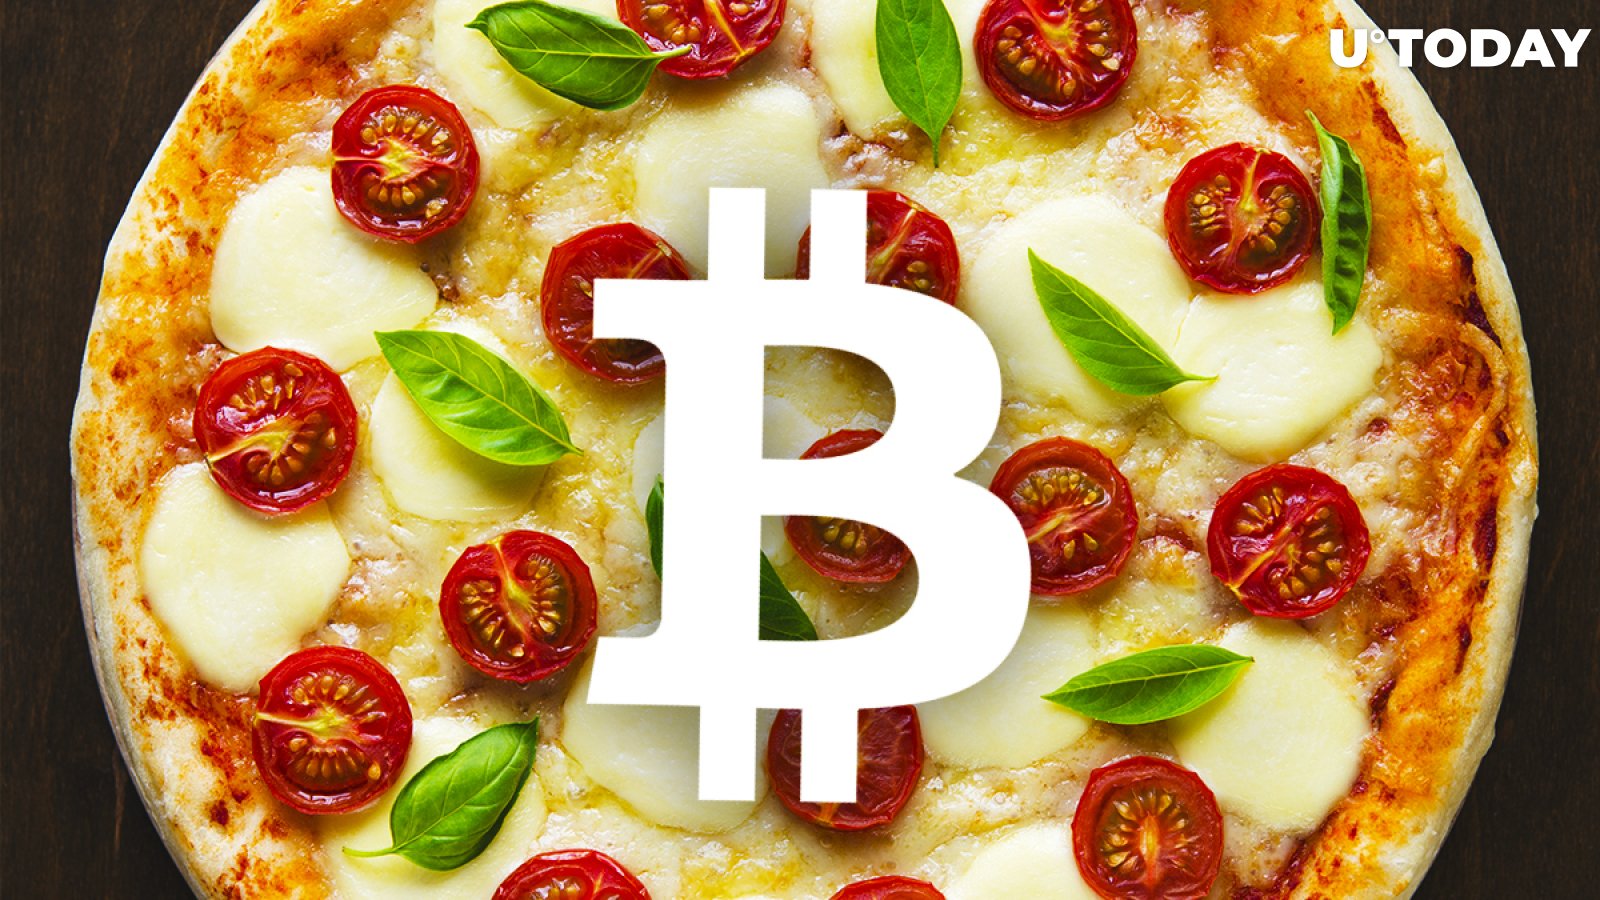 As BTC Price Reaches $8,000, ‘Bitcoin Pizza Guy’ Could Have Had $800 Mln